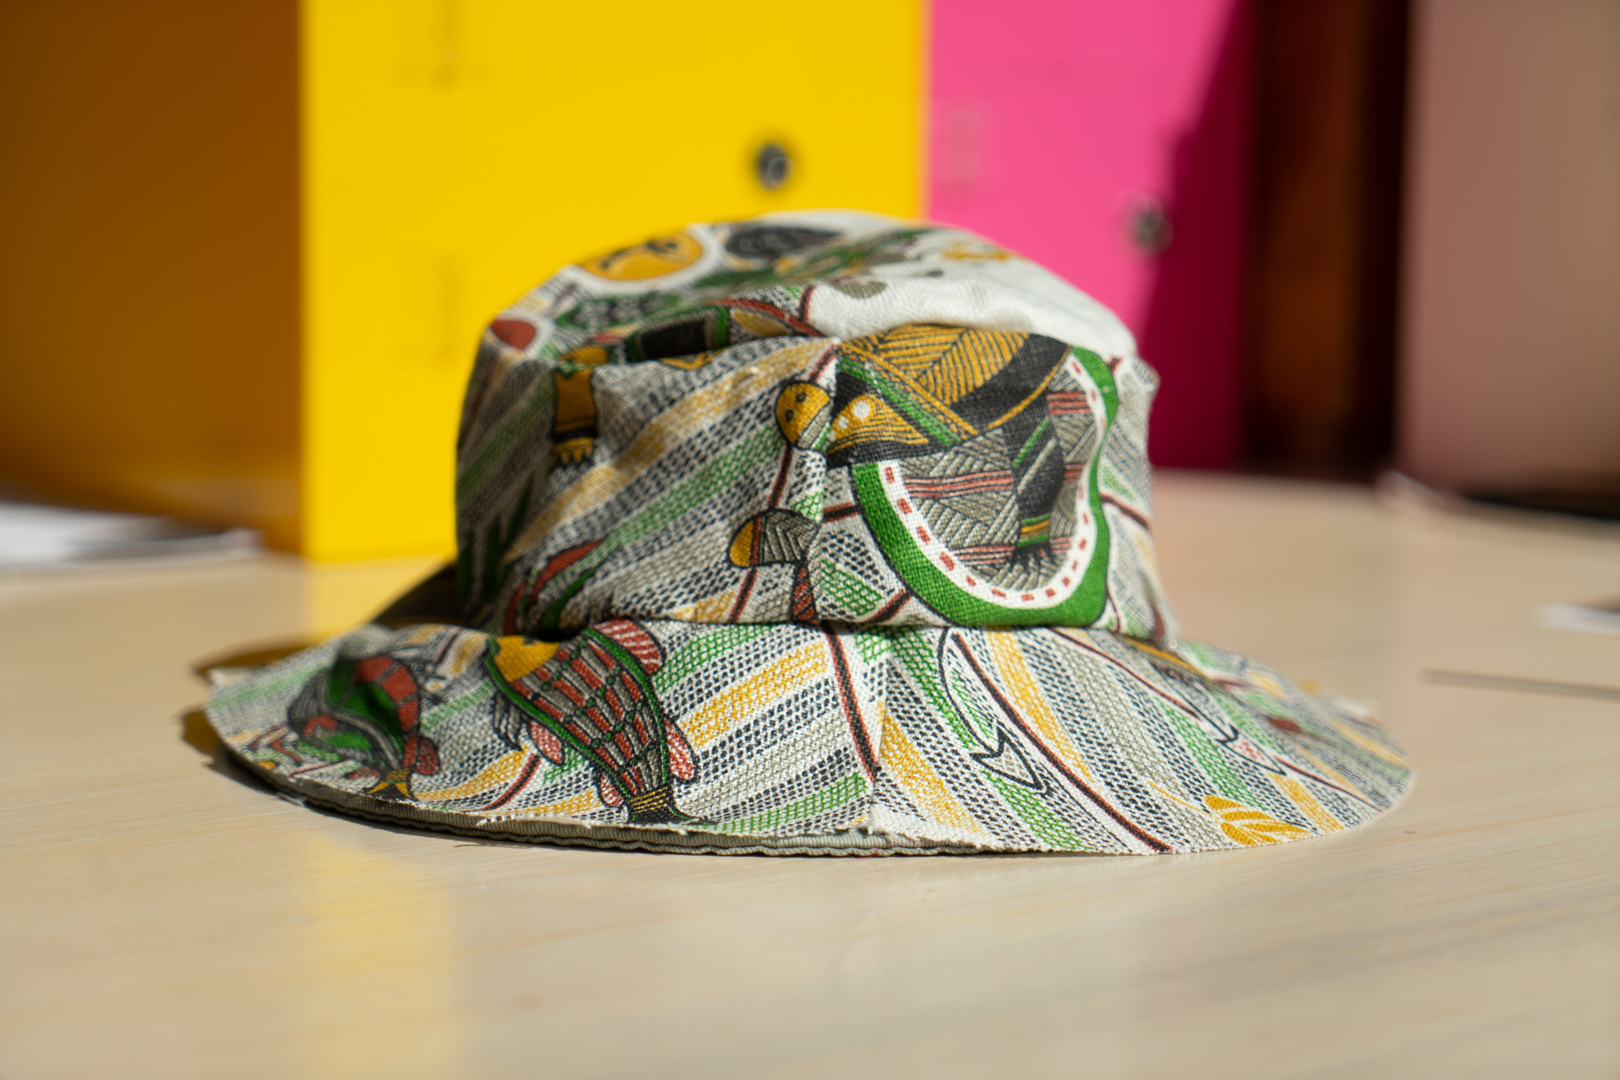 A colorful bucket hat sits on a light colored wood table